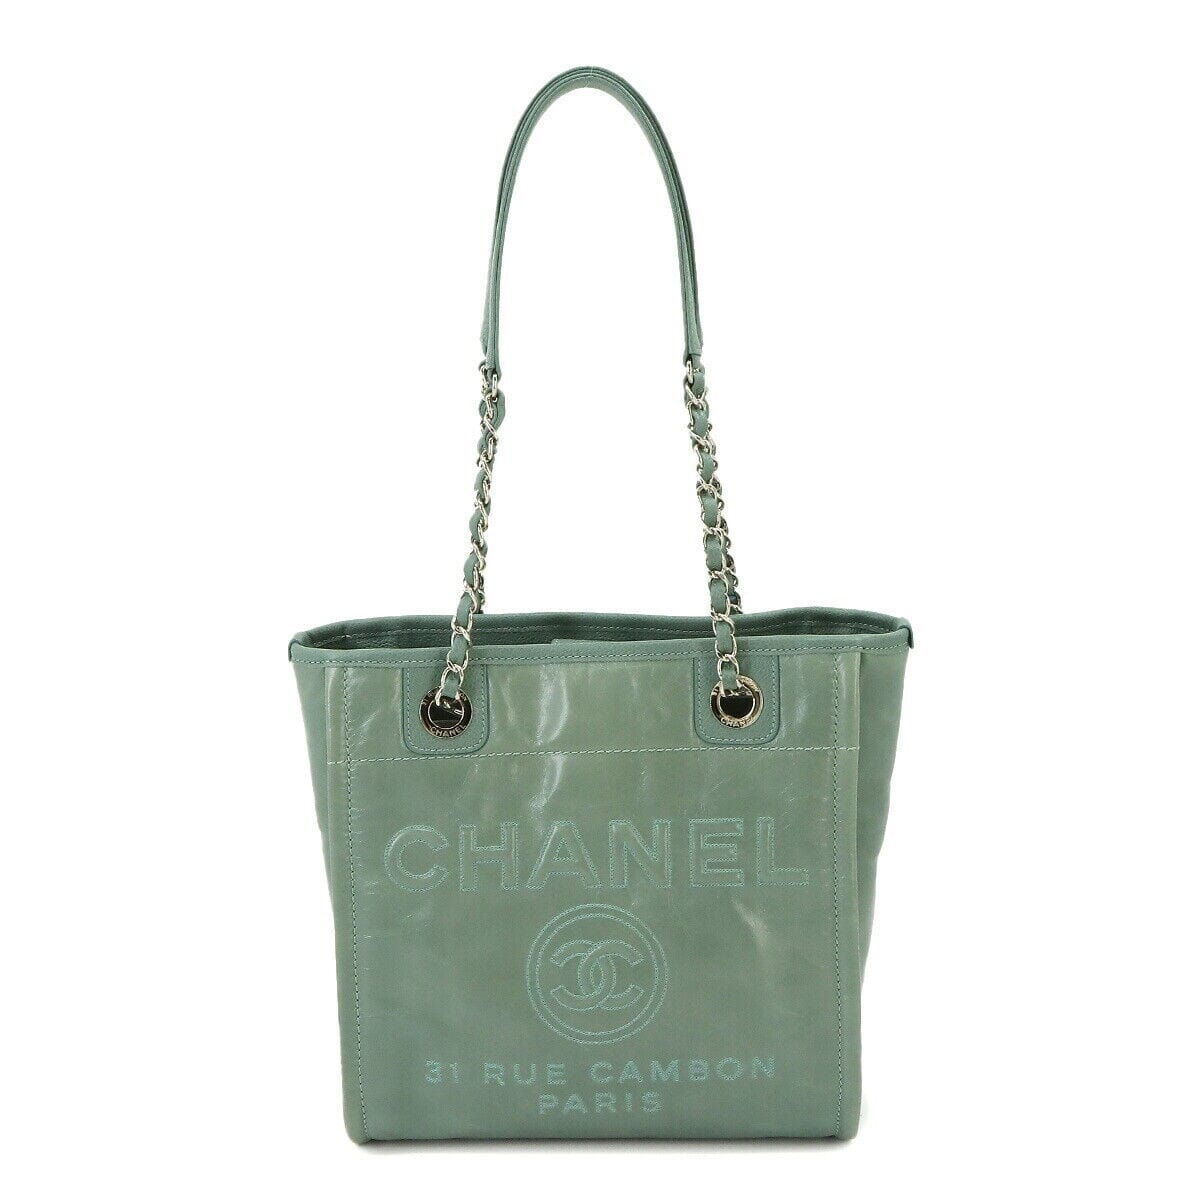 Chanel CHANEL Deauville PM Chain Tote Bag Leather Green A93256 Purse 90227225